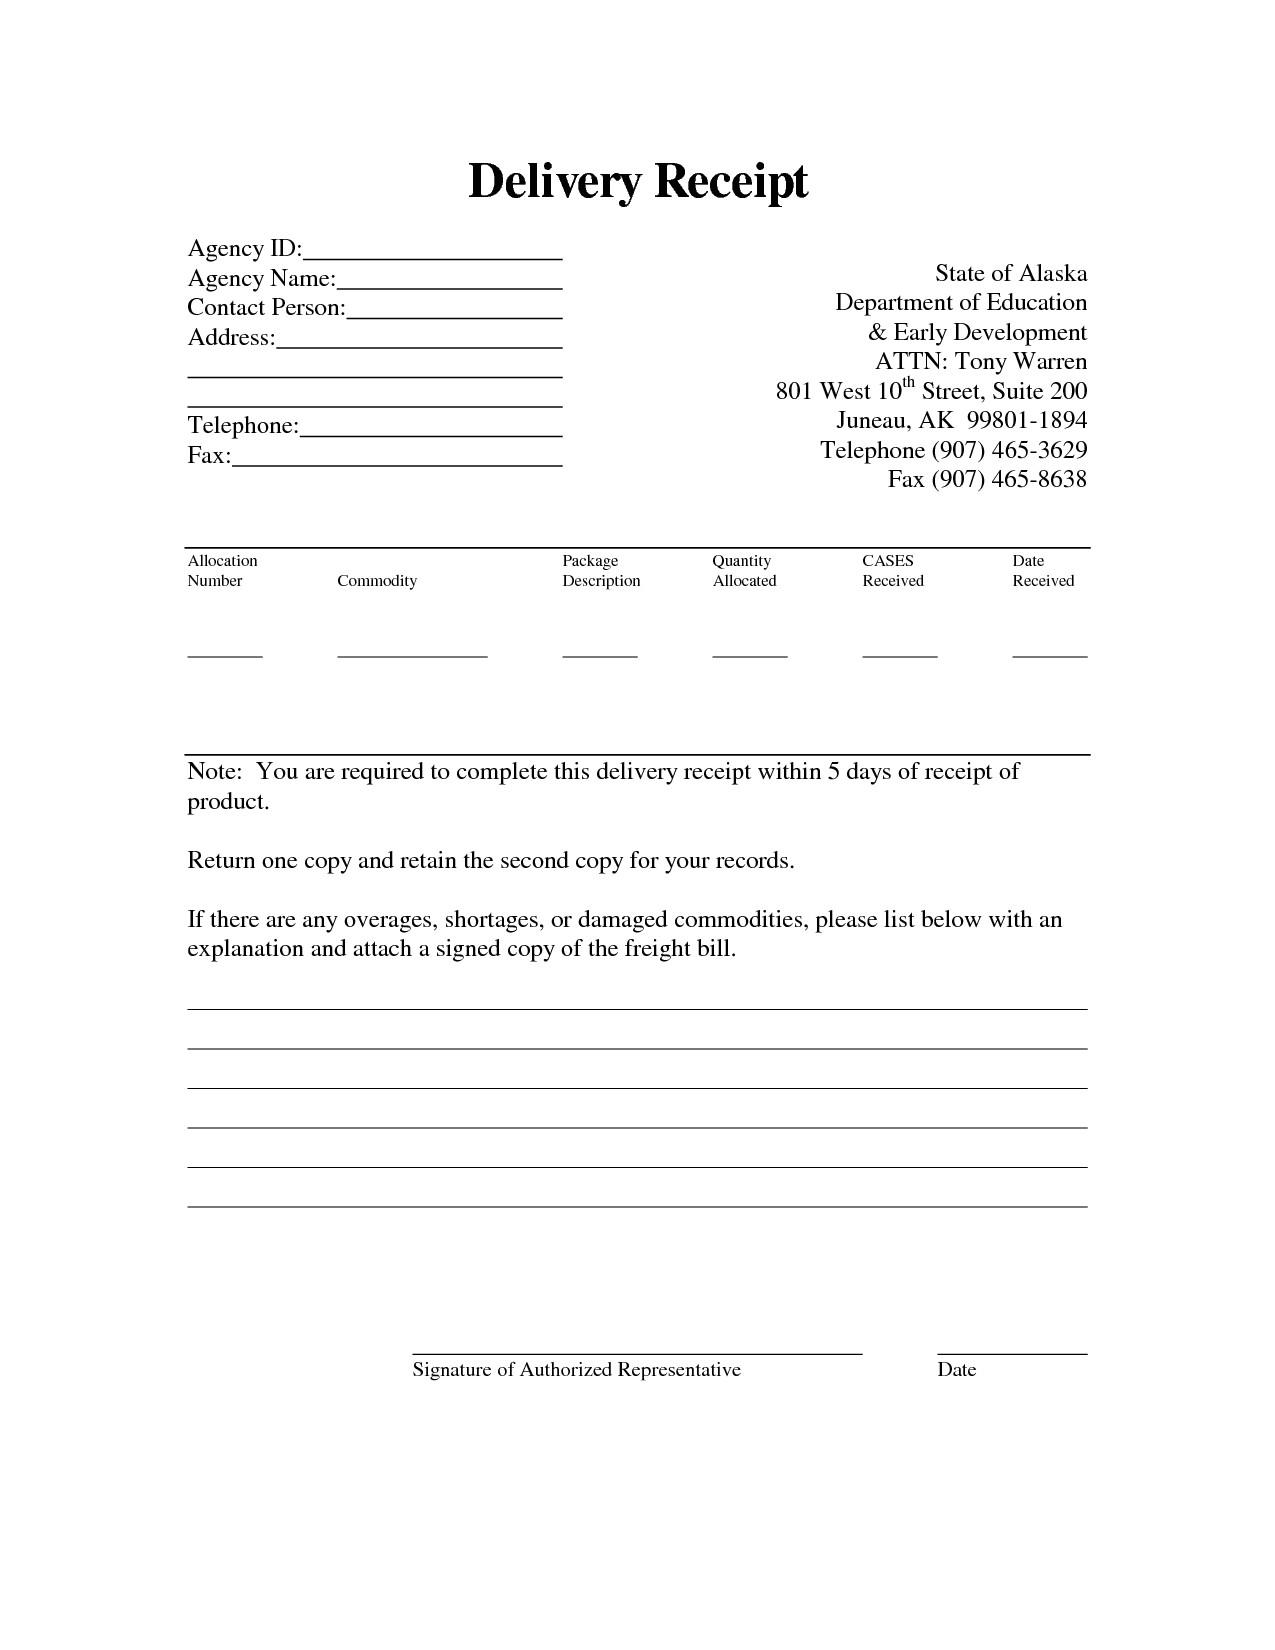 post courier delivery receipt form 113268